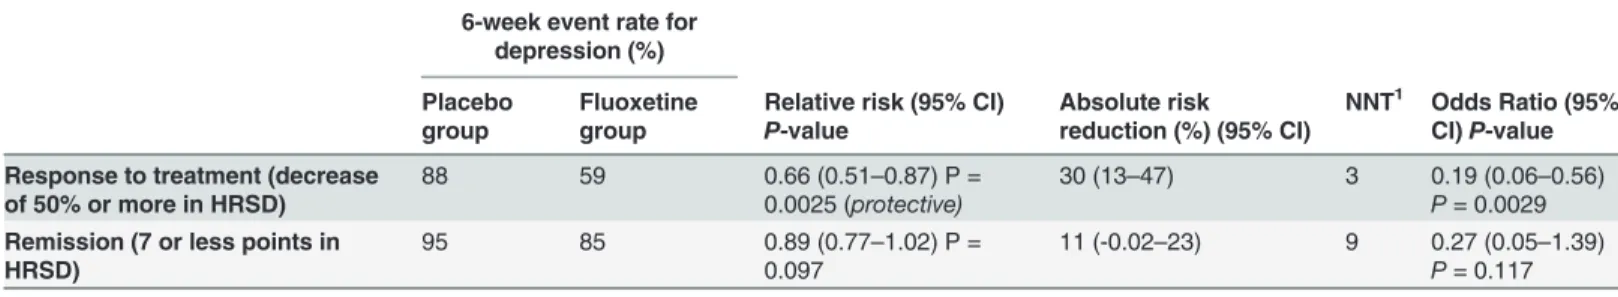 Table 6. Beneﬁt of 6-weeks ﬂuoxetine treatment in patients who responded to treatment and who had remission according 17-item Hamilton Rating Scale for Depression.